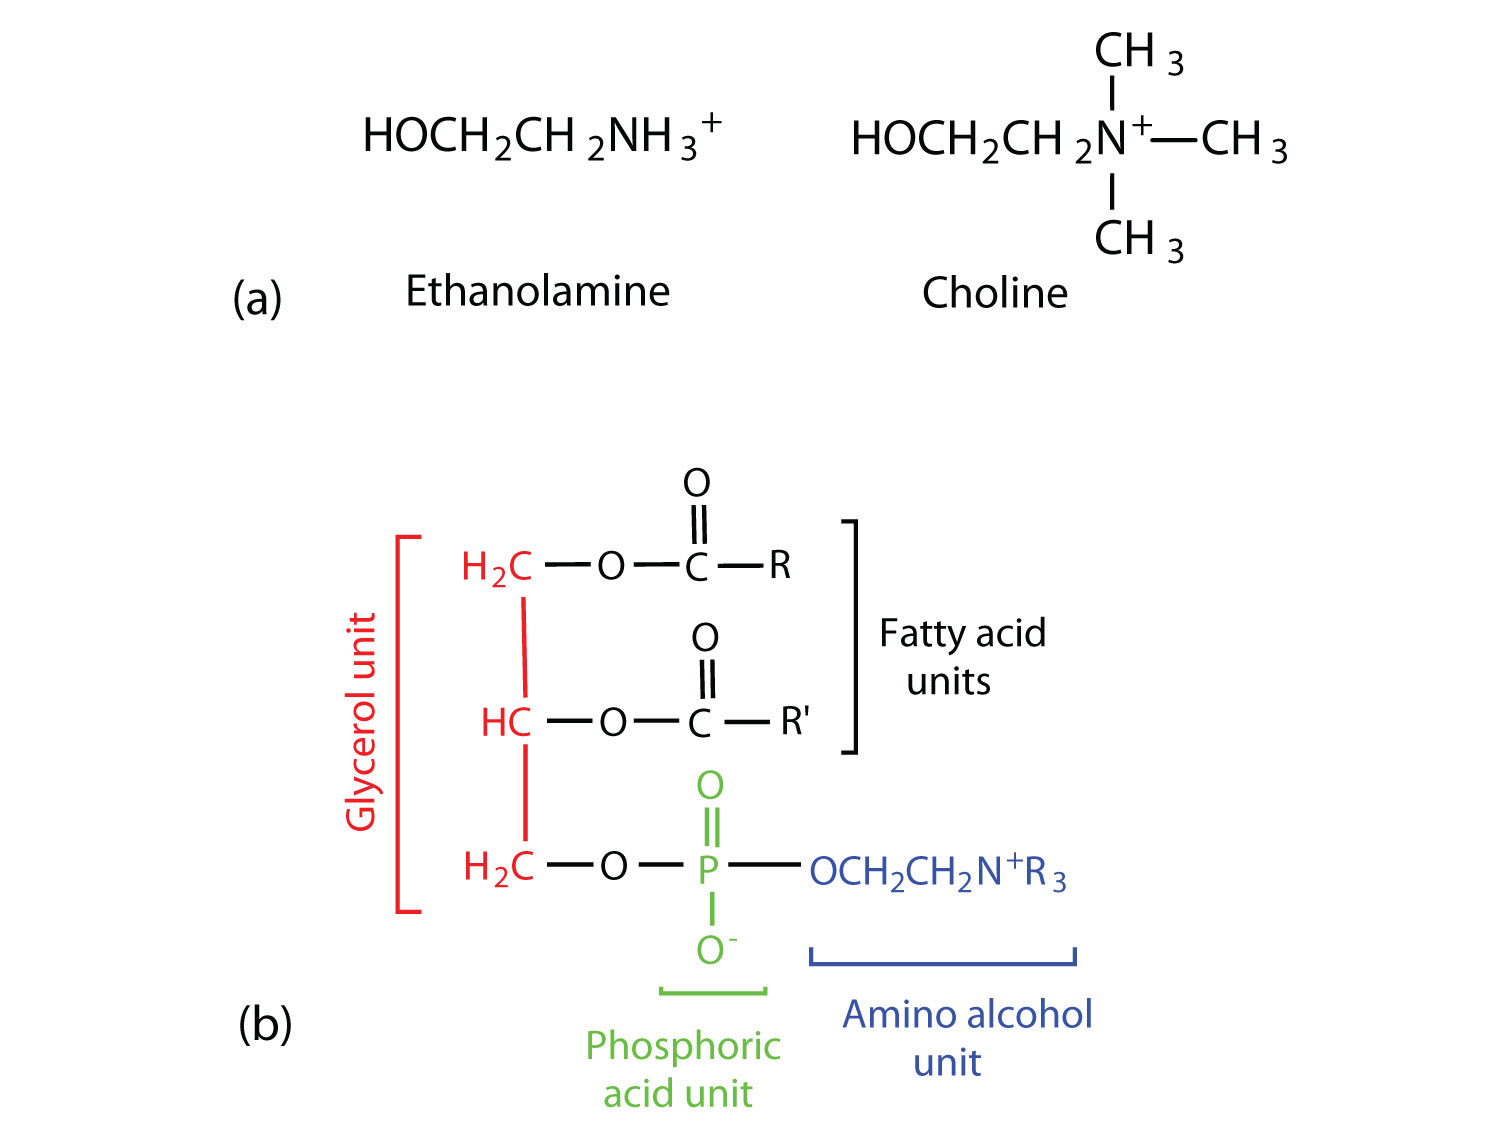 Top: Structures of ethanolamine and choline. Bottom: The structural formula of a phosphoglyceride is shown with the glycerol unit, phosphoric unit, and amino alcohol unit